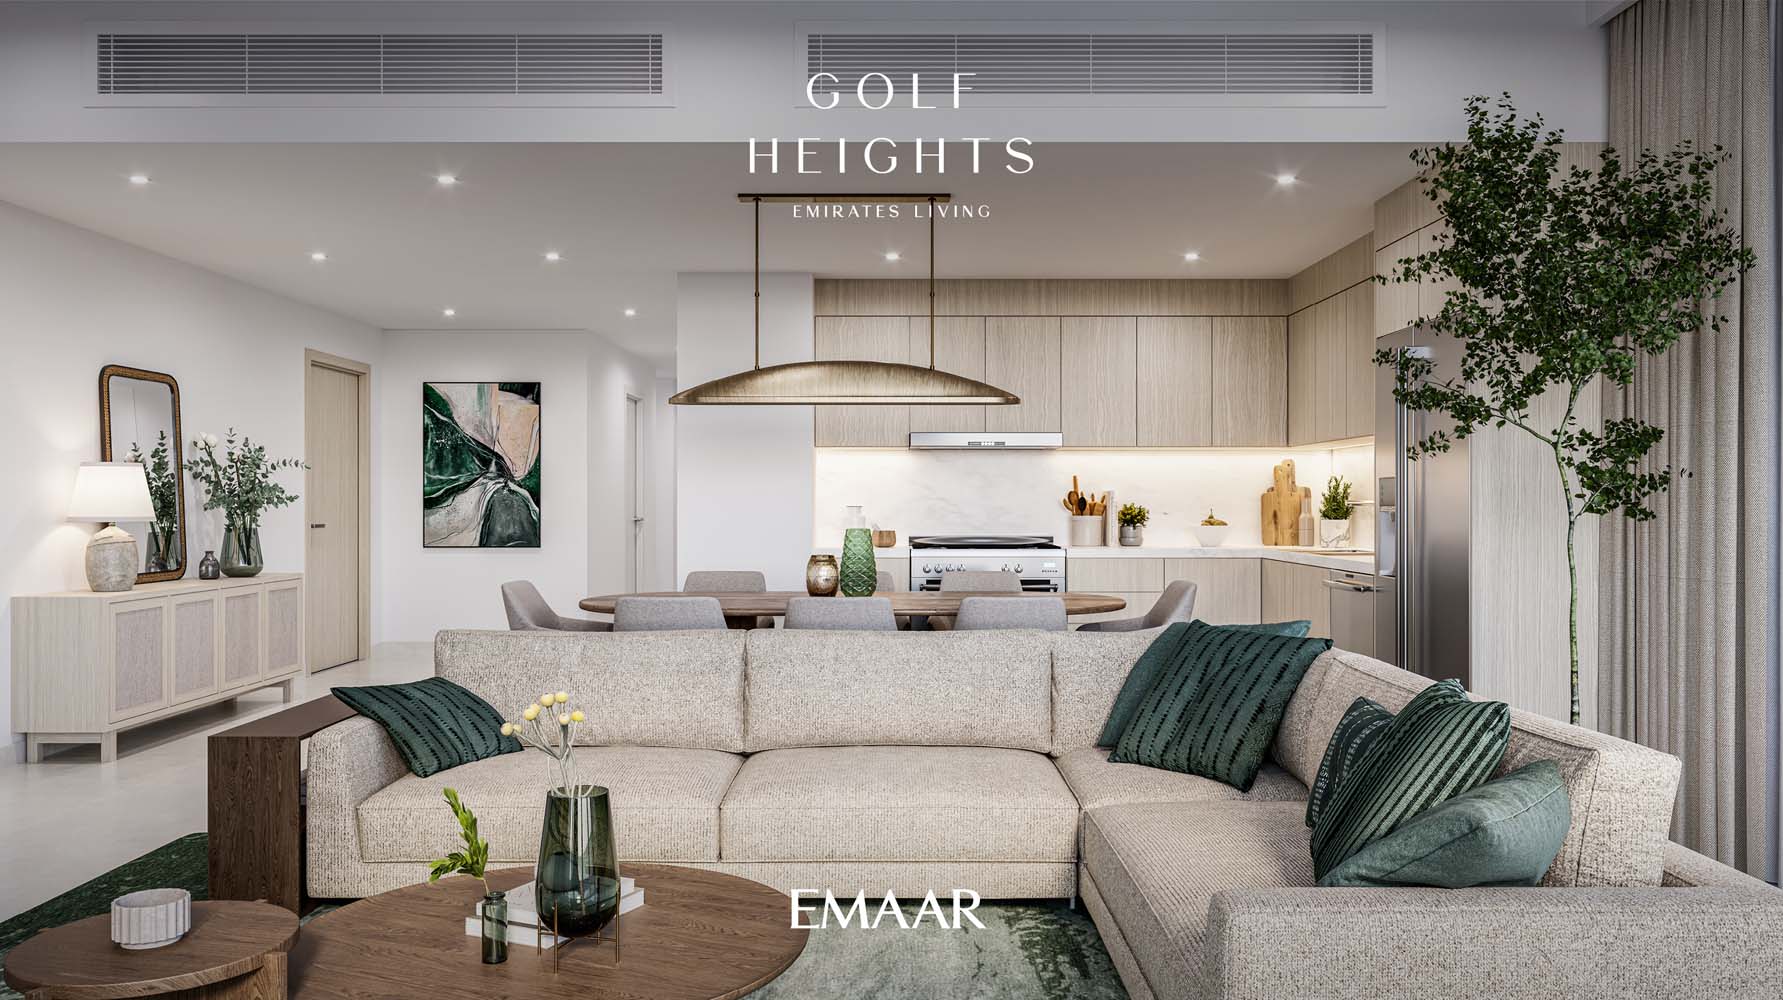 latest-project-in-dubai-golf-heights-for-sale-in-emirates-living